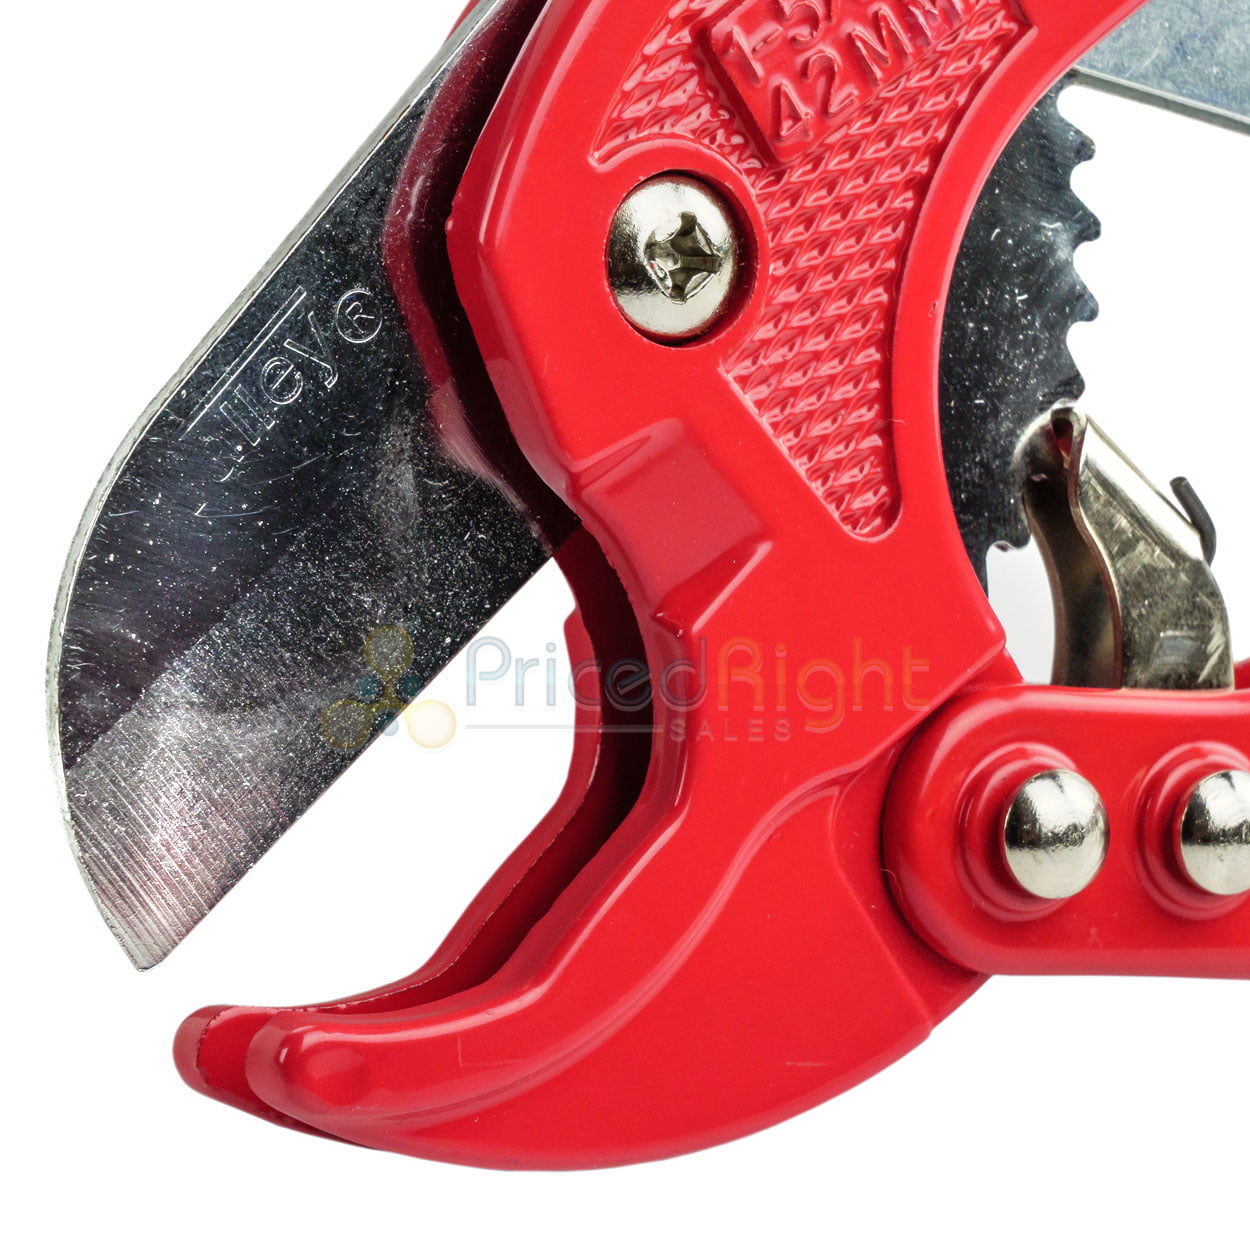 2 PCS PEX /CPVC PIPE/Tubing Cutter for 1/4" 3/8" 1/2" 3/4" and 1" 